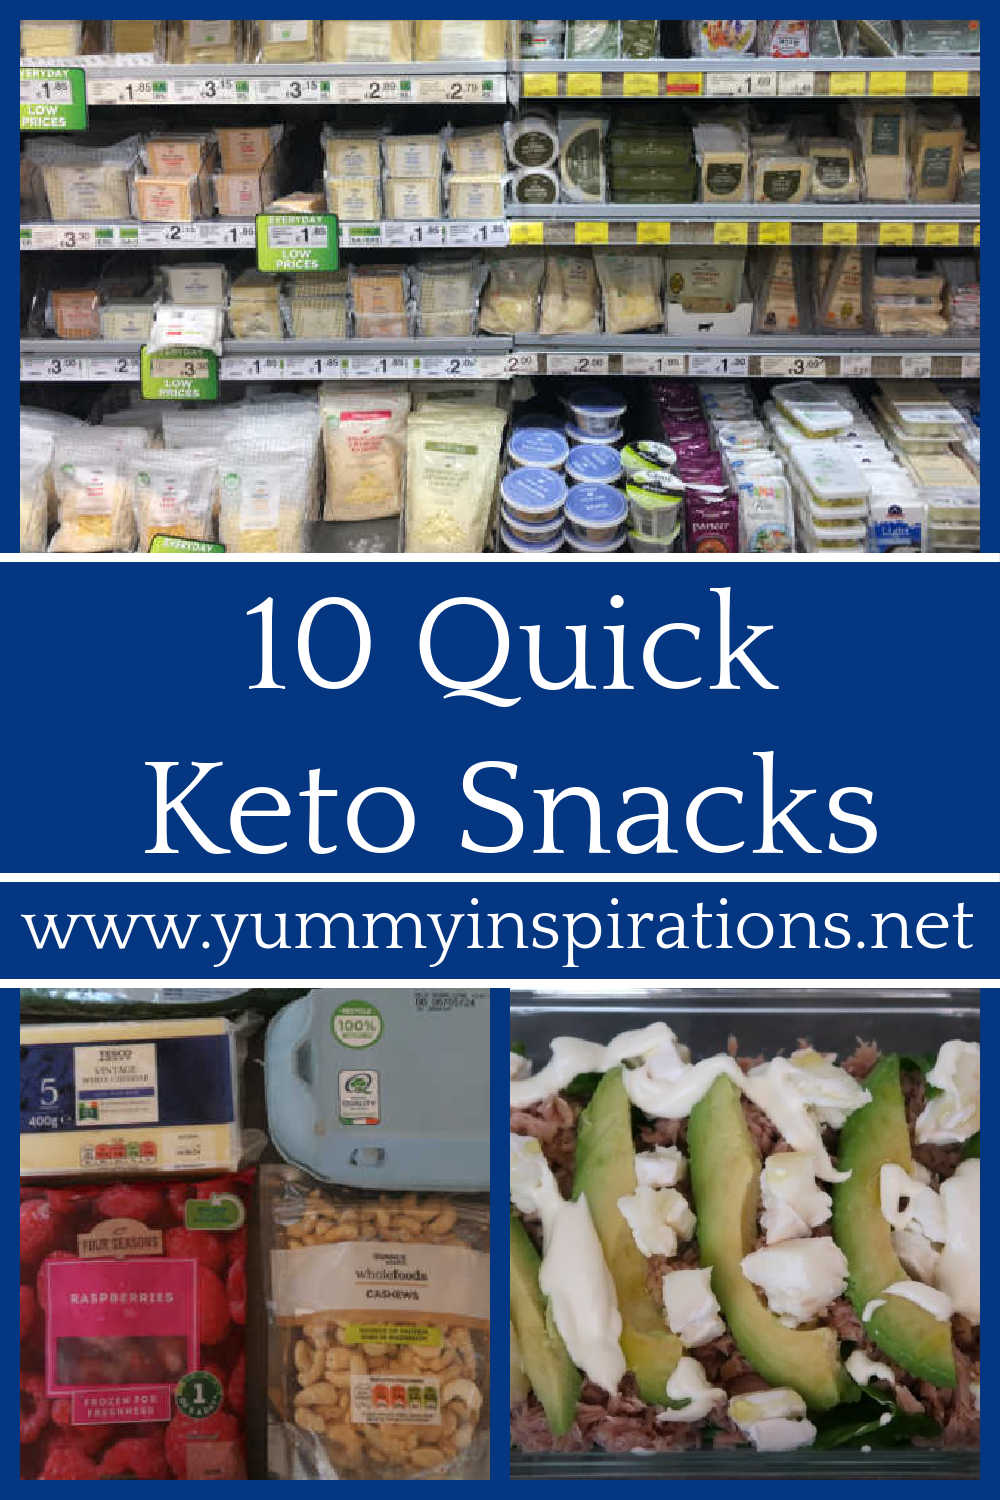 10 Quick Keto Snacks - The Best Low Carb Snack Ideas and delicious easy recipes to make - plus a video with more tips and ideas.